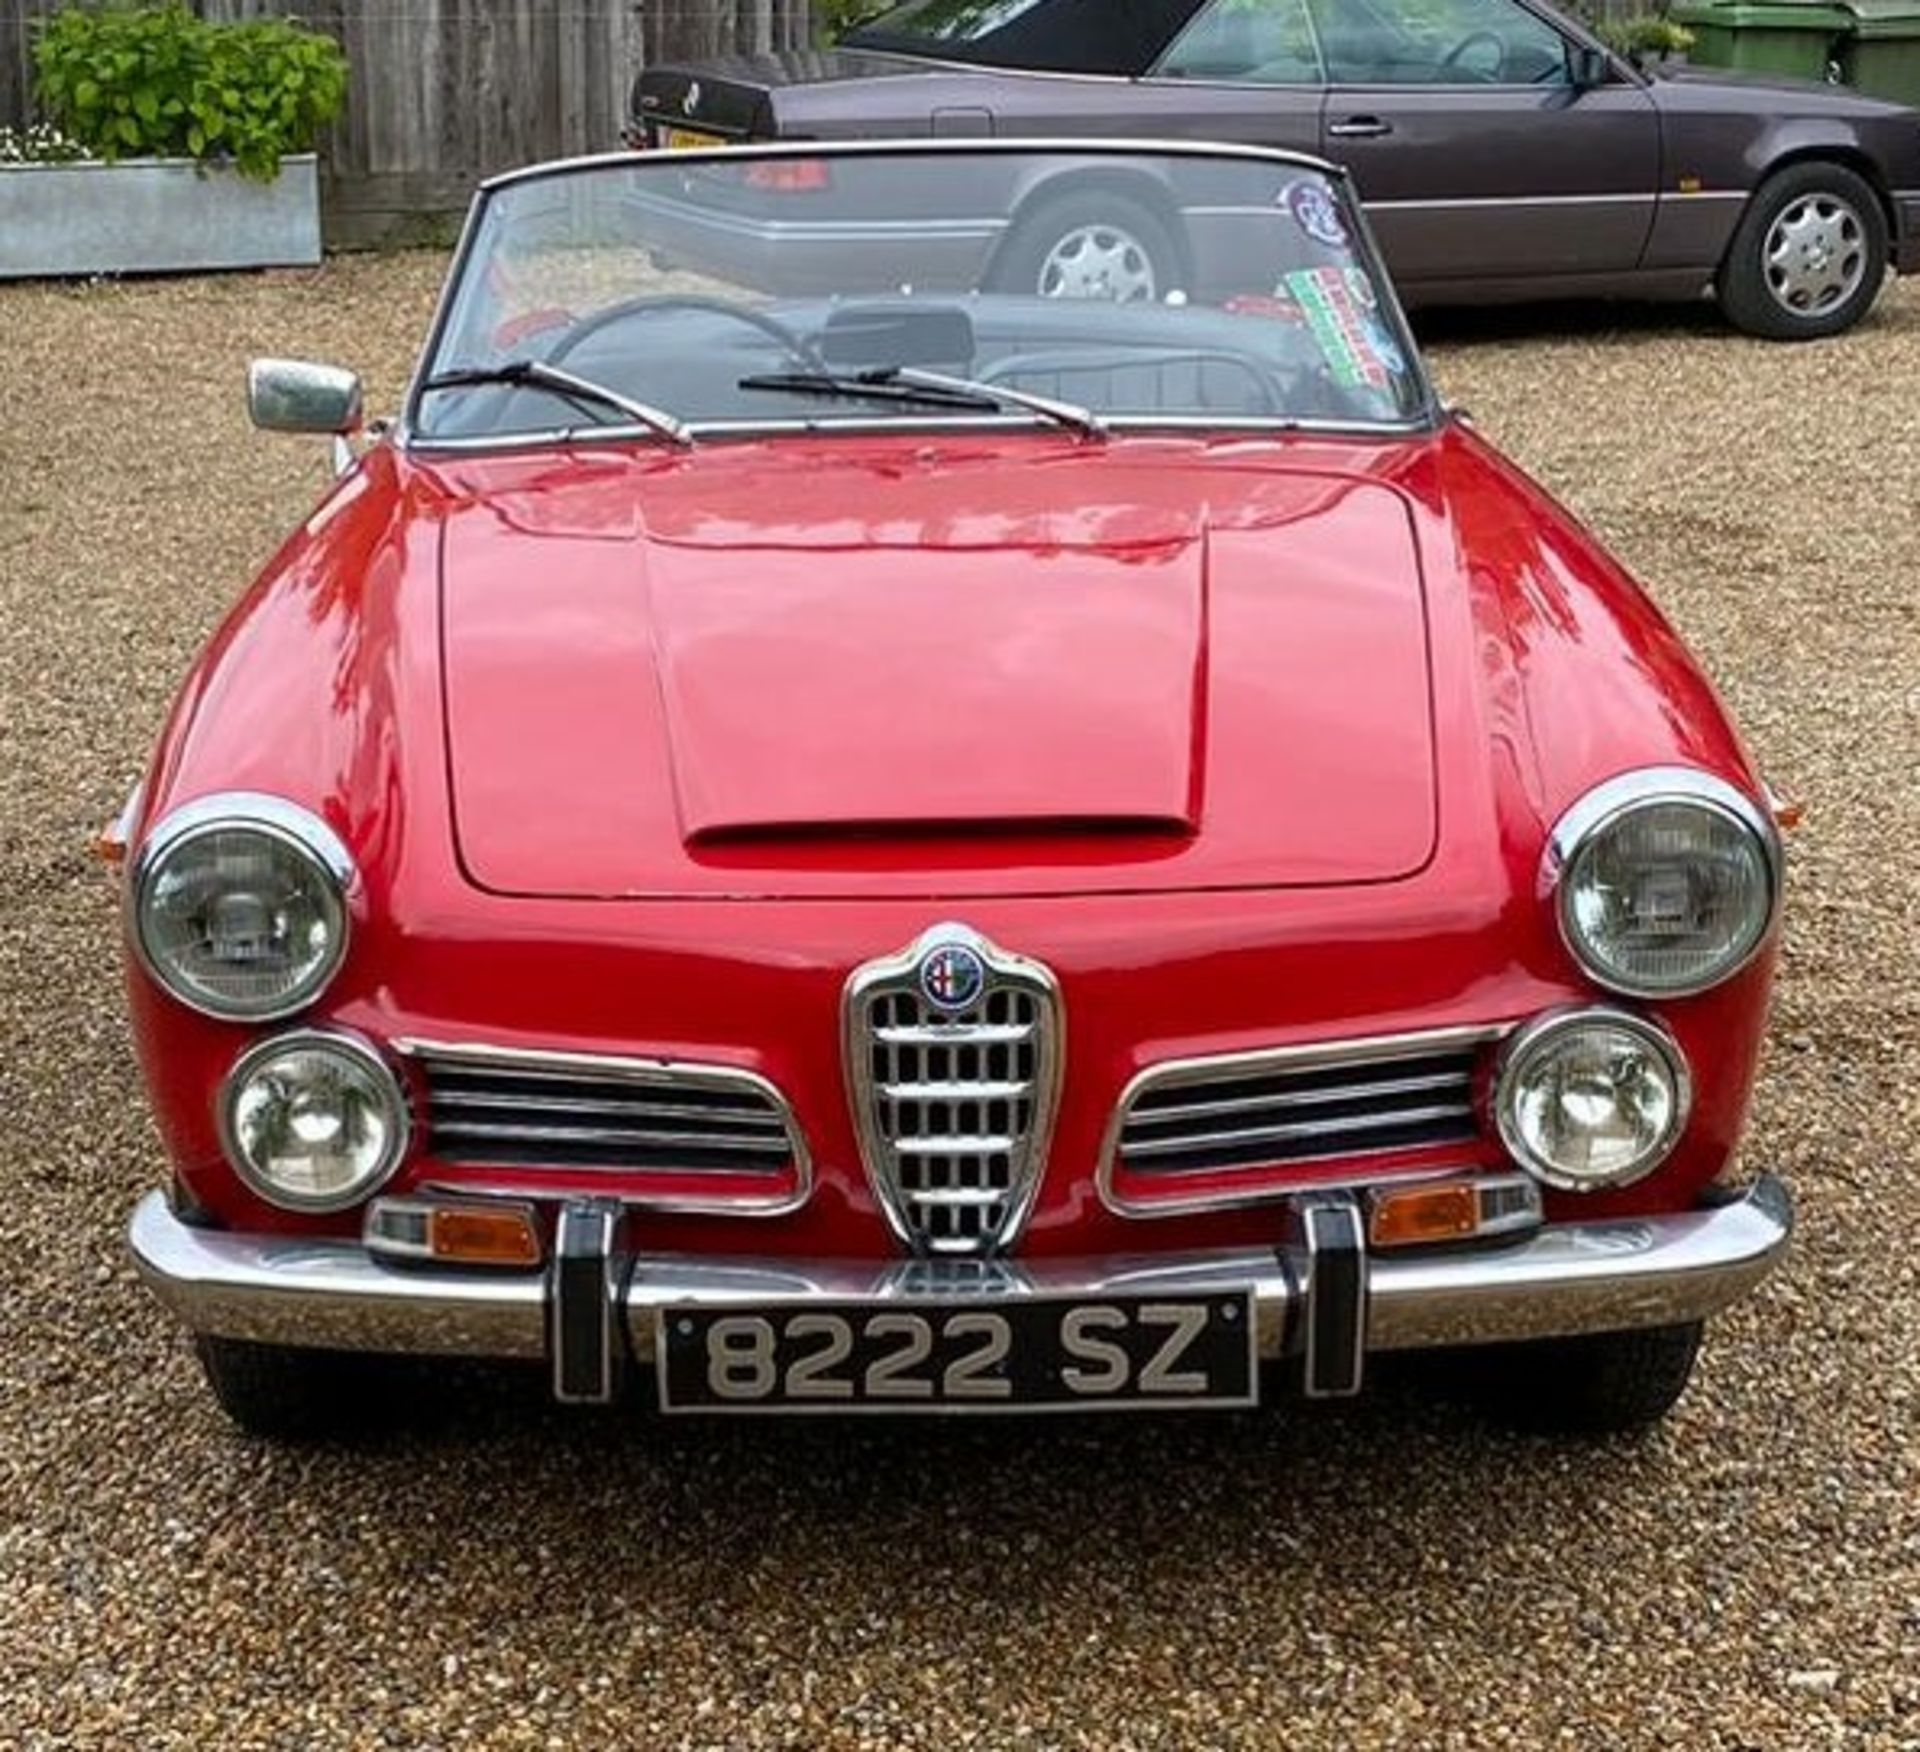 1963 Alfa Romeo 2600 Spider - First Registered 1967 - Image 4 of 25